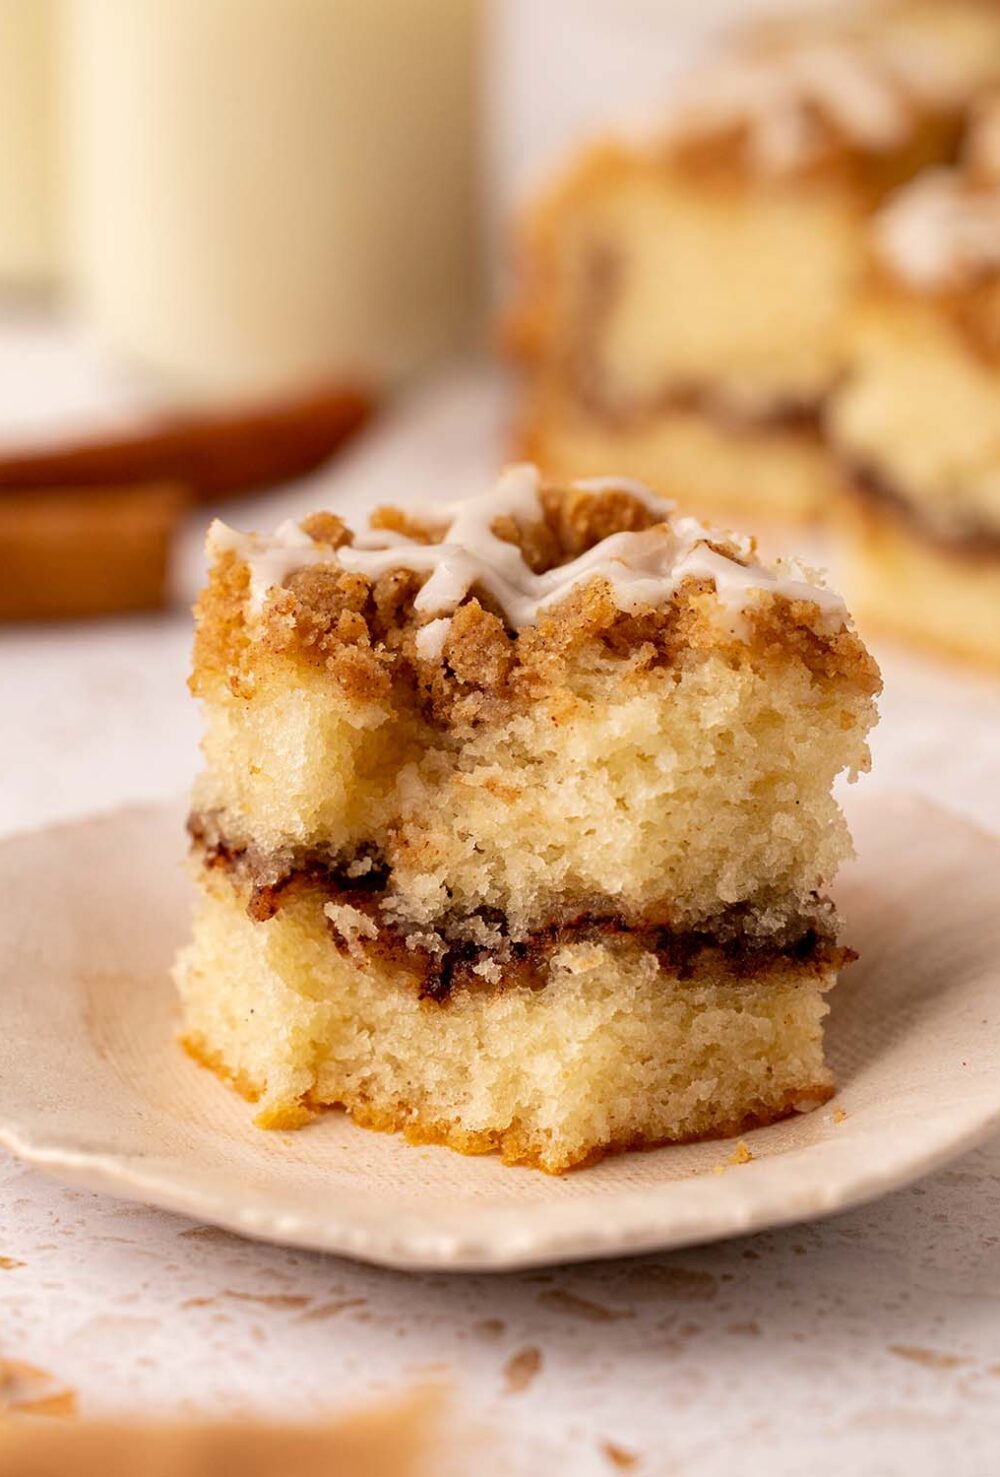 Close up of a slice of coffee cake that has a bite taken out of it. The cake has a light golden sponge, thick layer of cinnamon sugar and crumb topping.